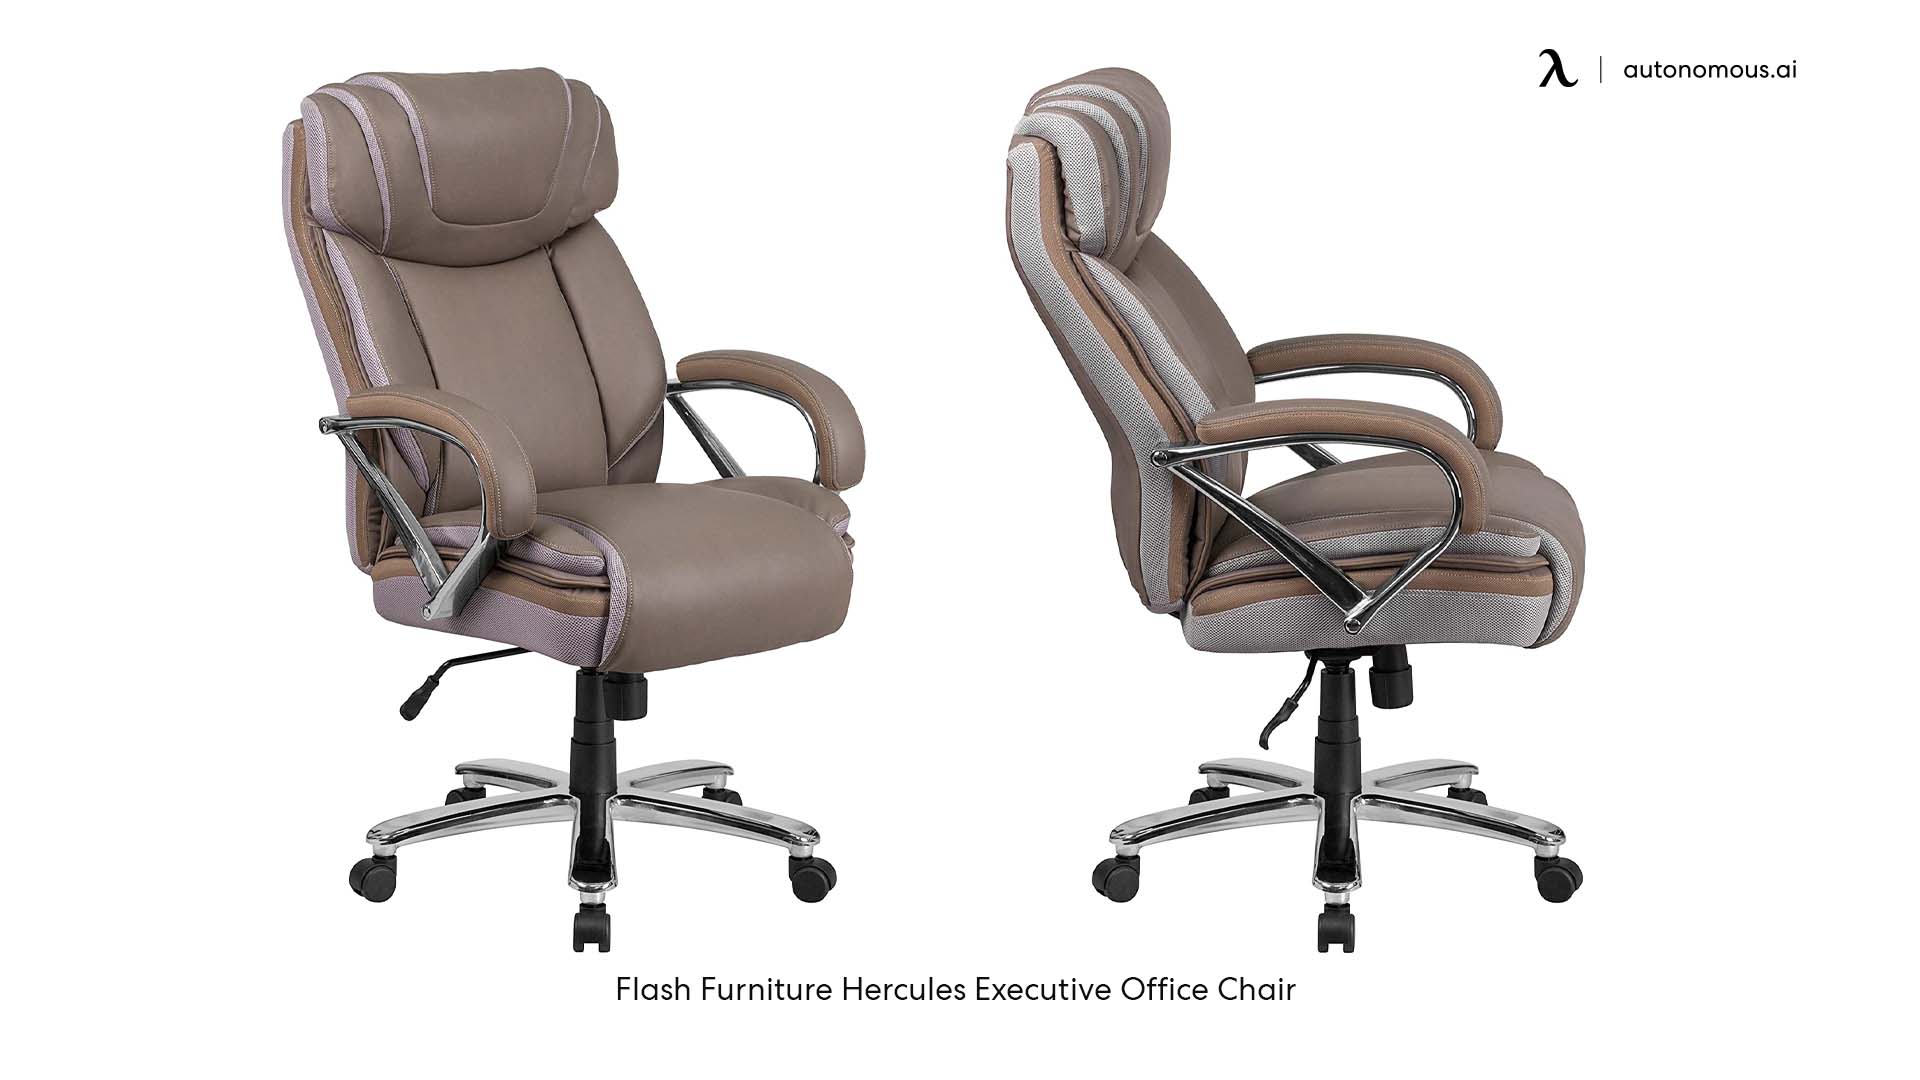 Flash Furniture heavy duty office chairs